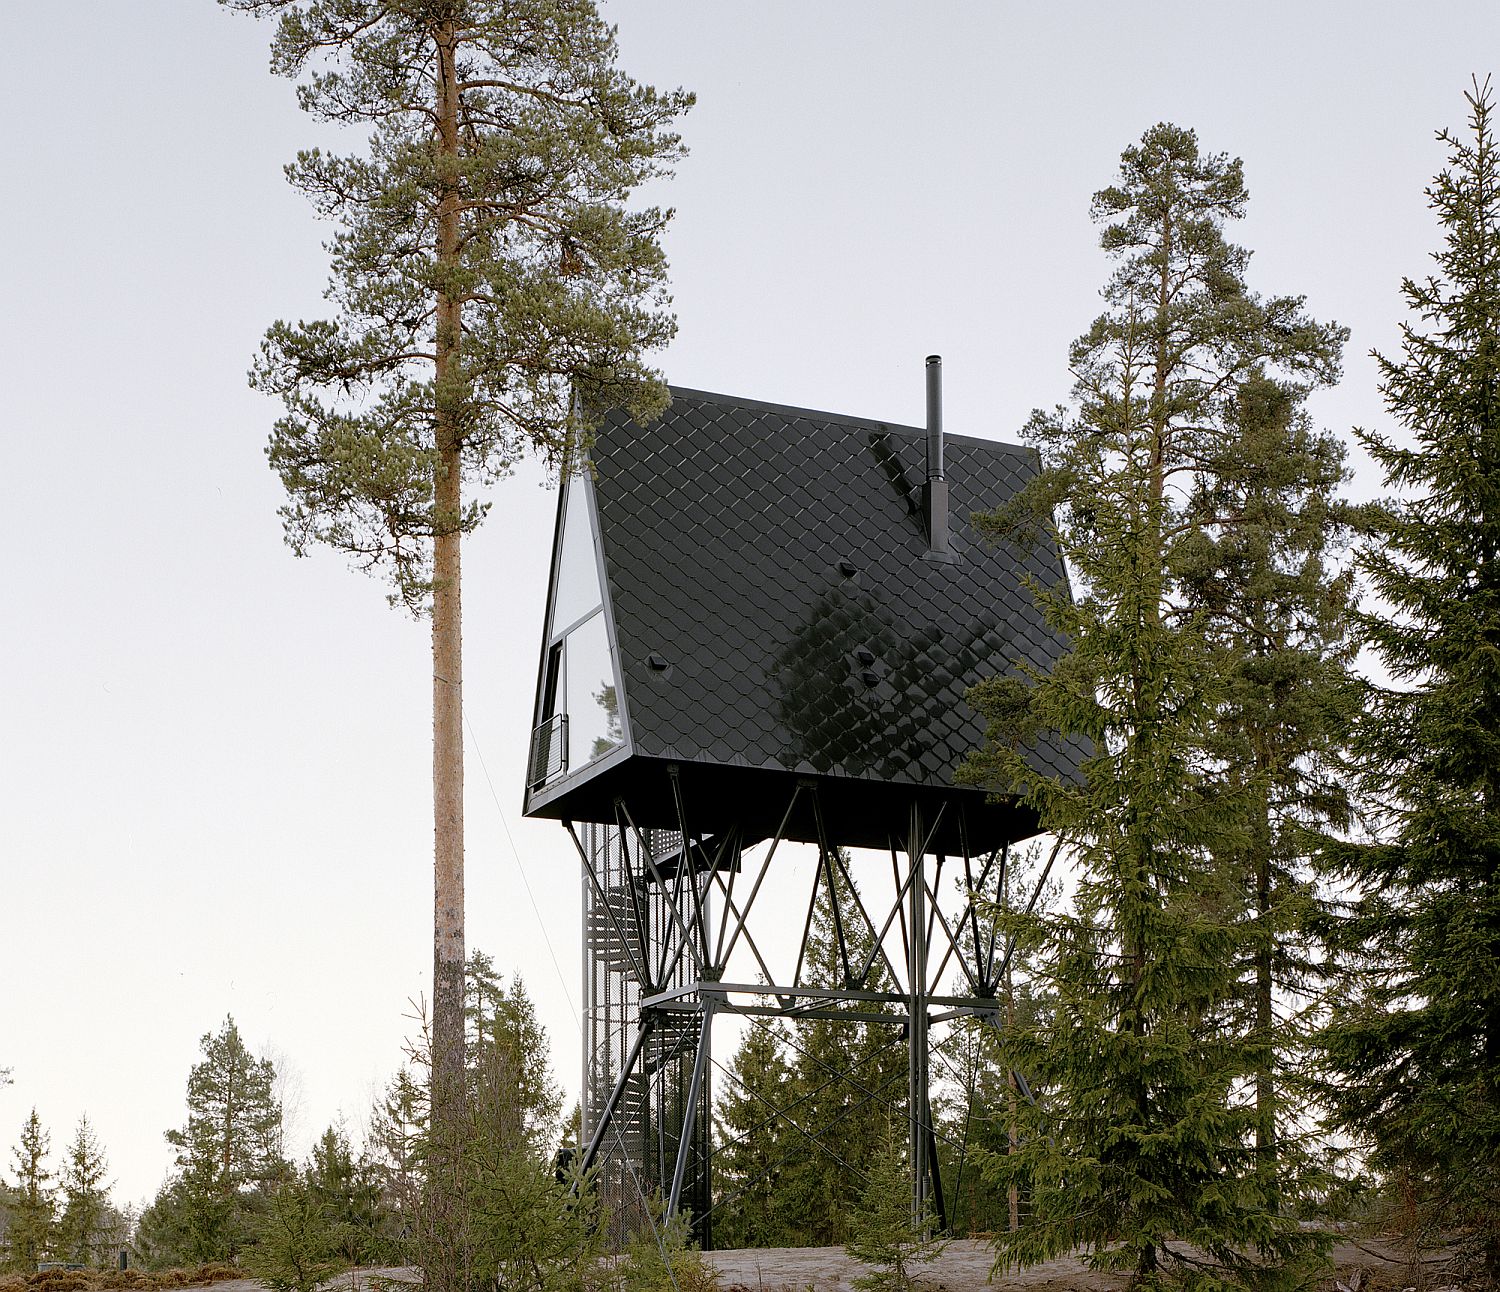 Unique-and-modern-rental-cabins-in-forests-of-Norway-that-stand-on-steel-beams